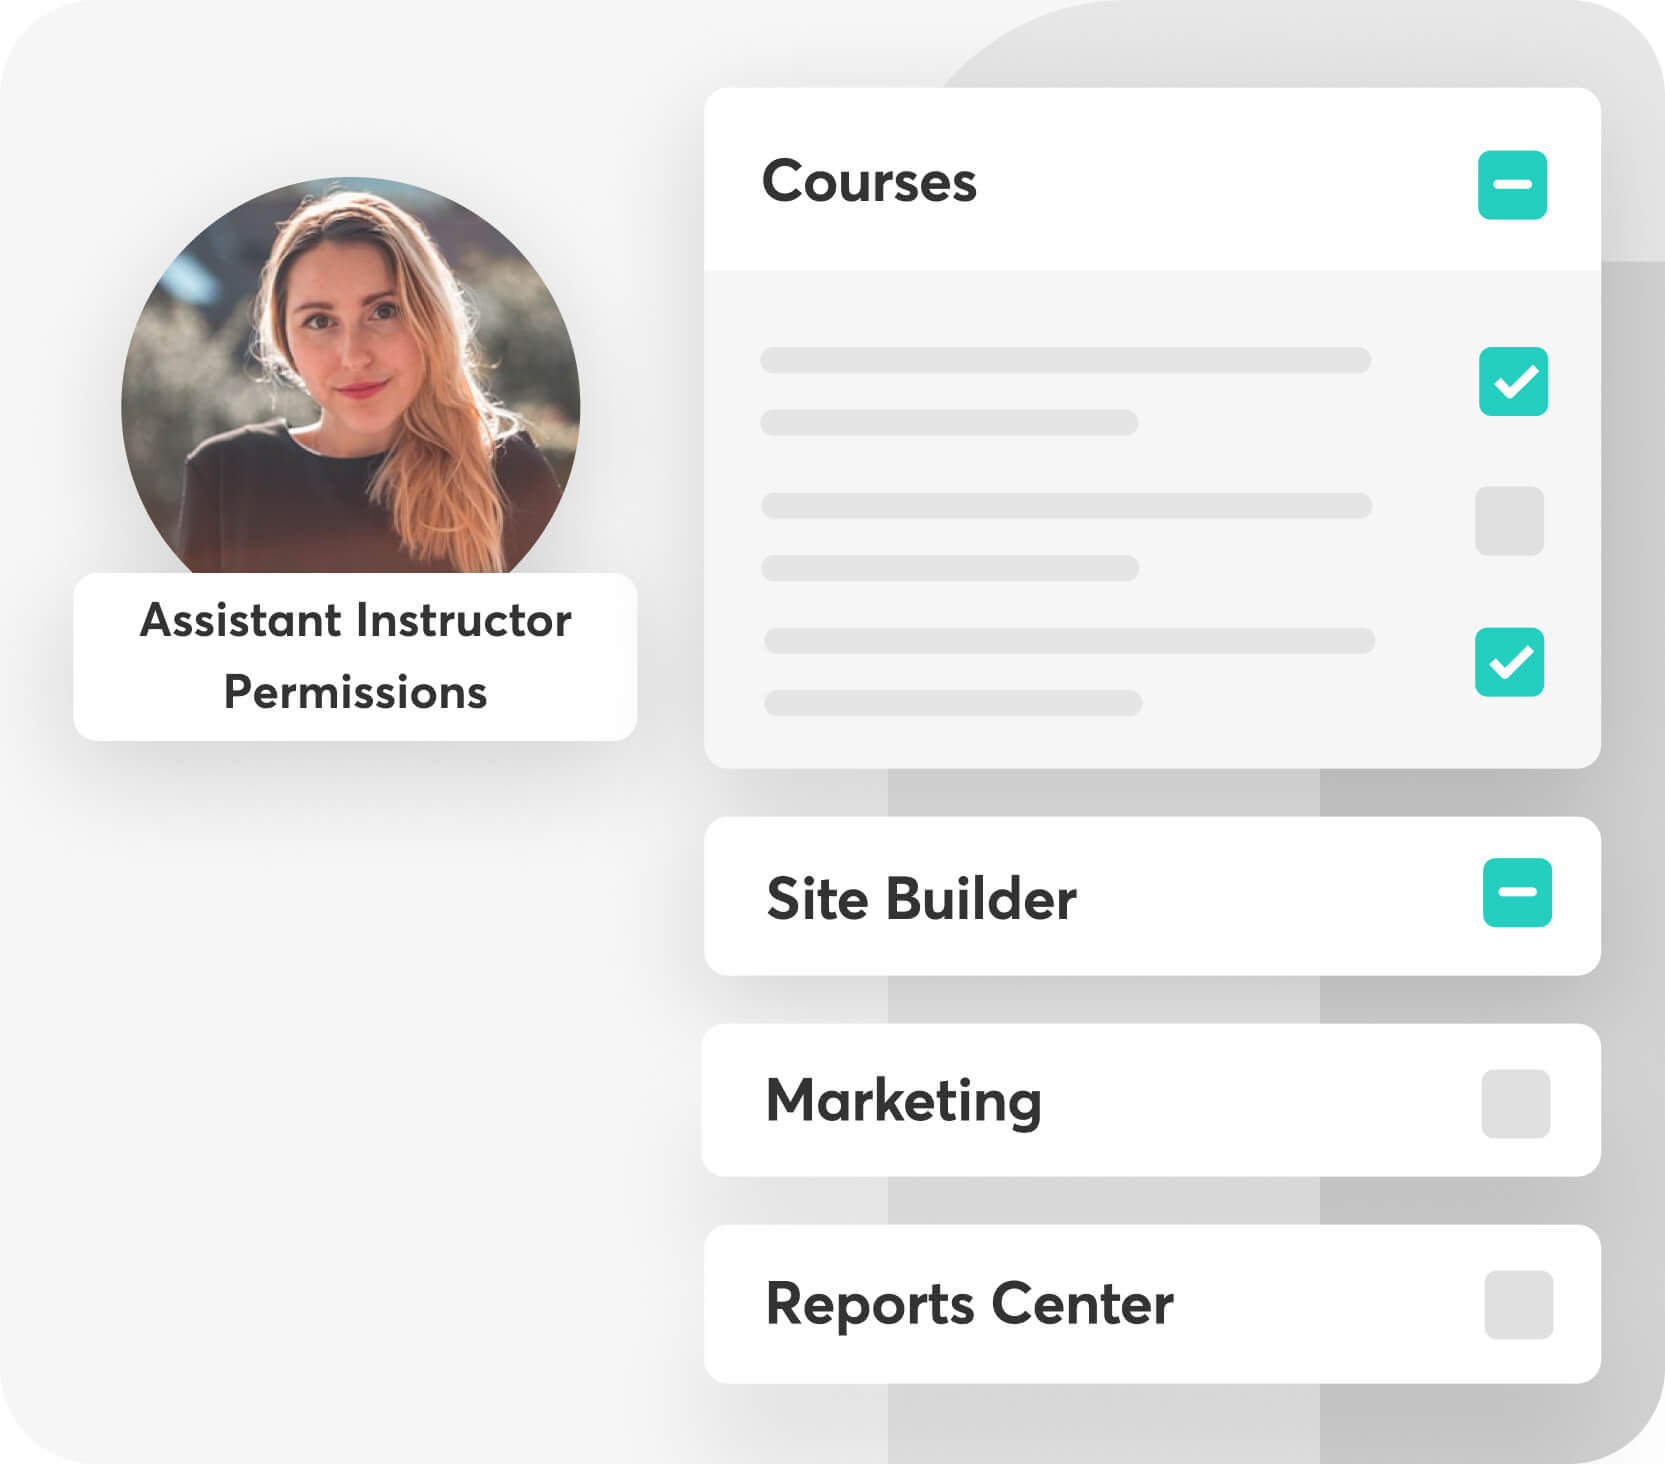 Showing the degree of customization in permission levels, assigning roles and responsibilites.